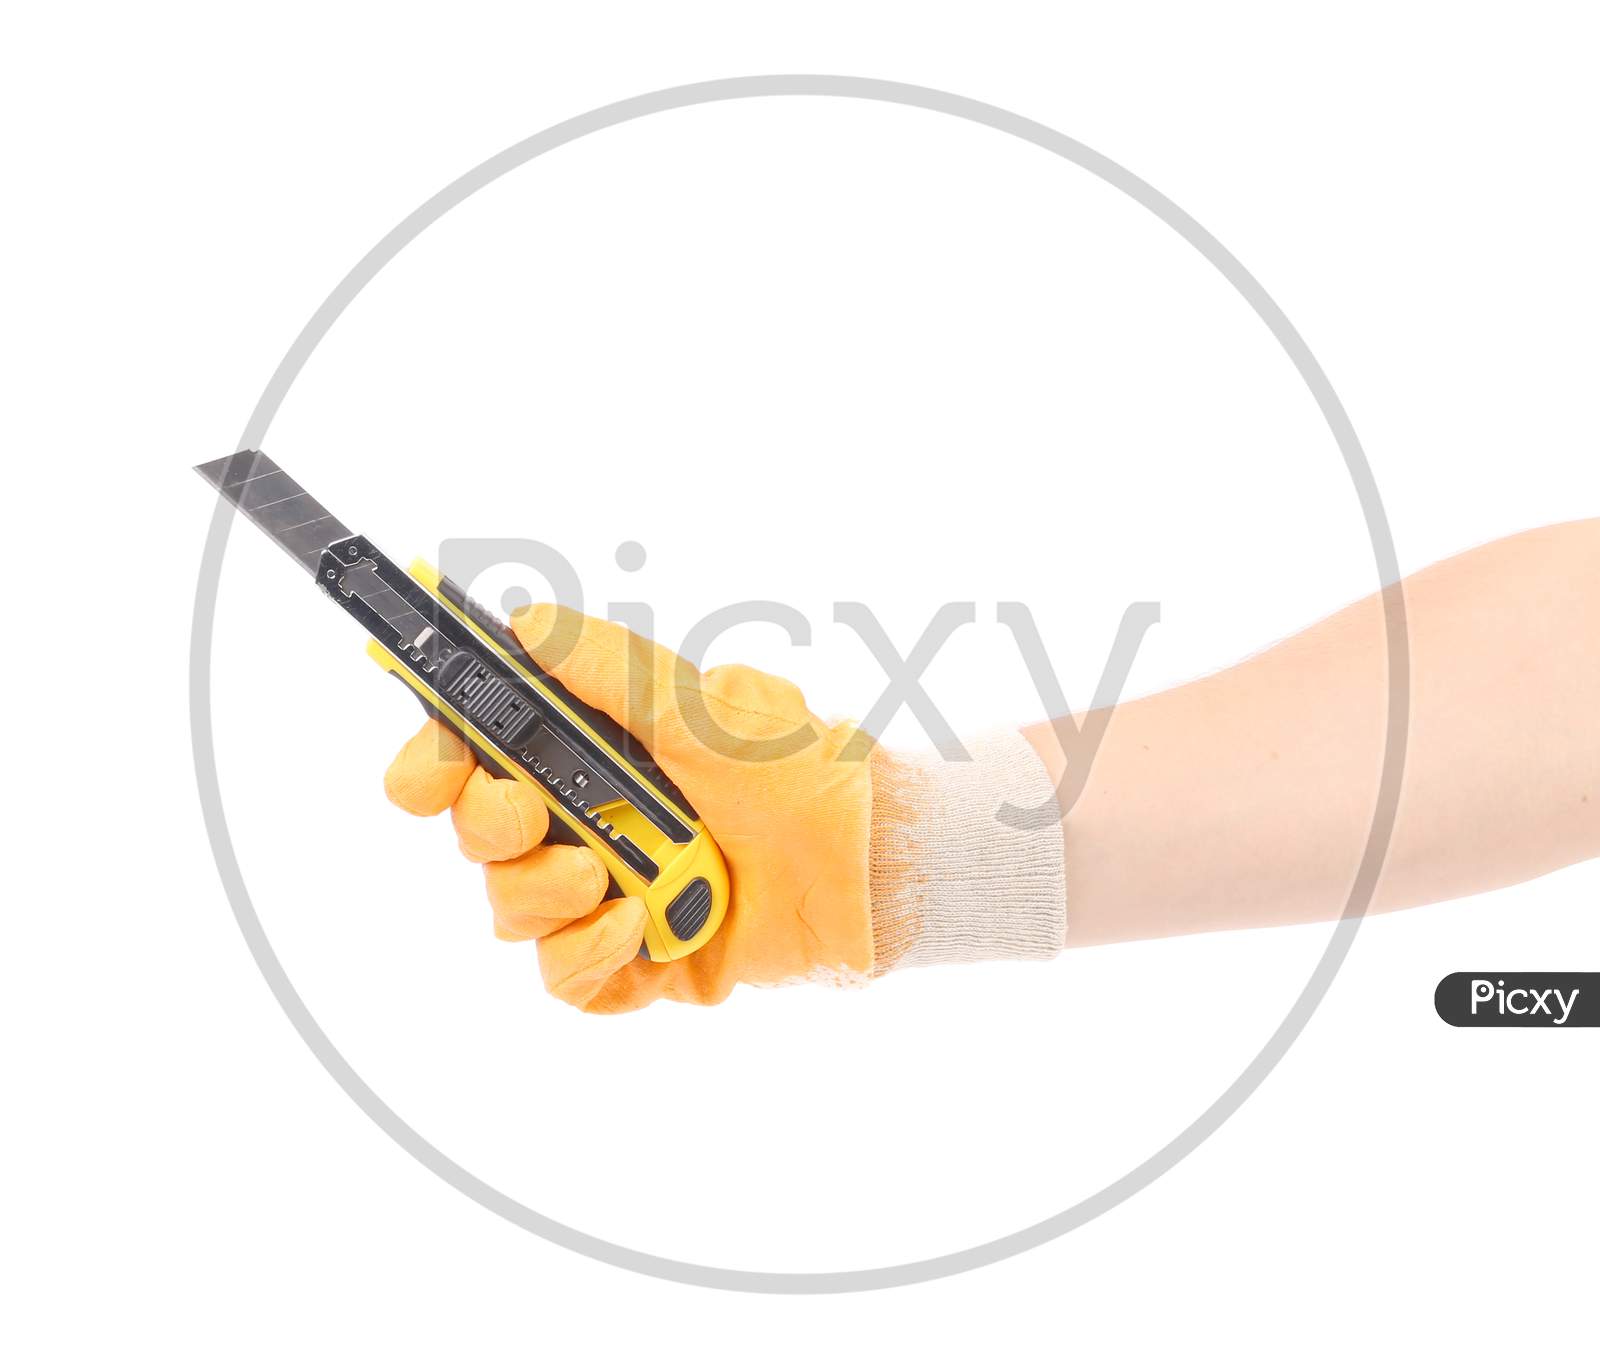 Hand In Gloves Holding Knife. Isolated On A White Background.